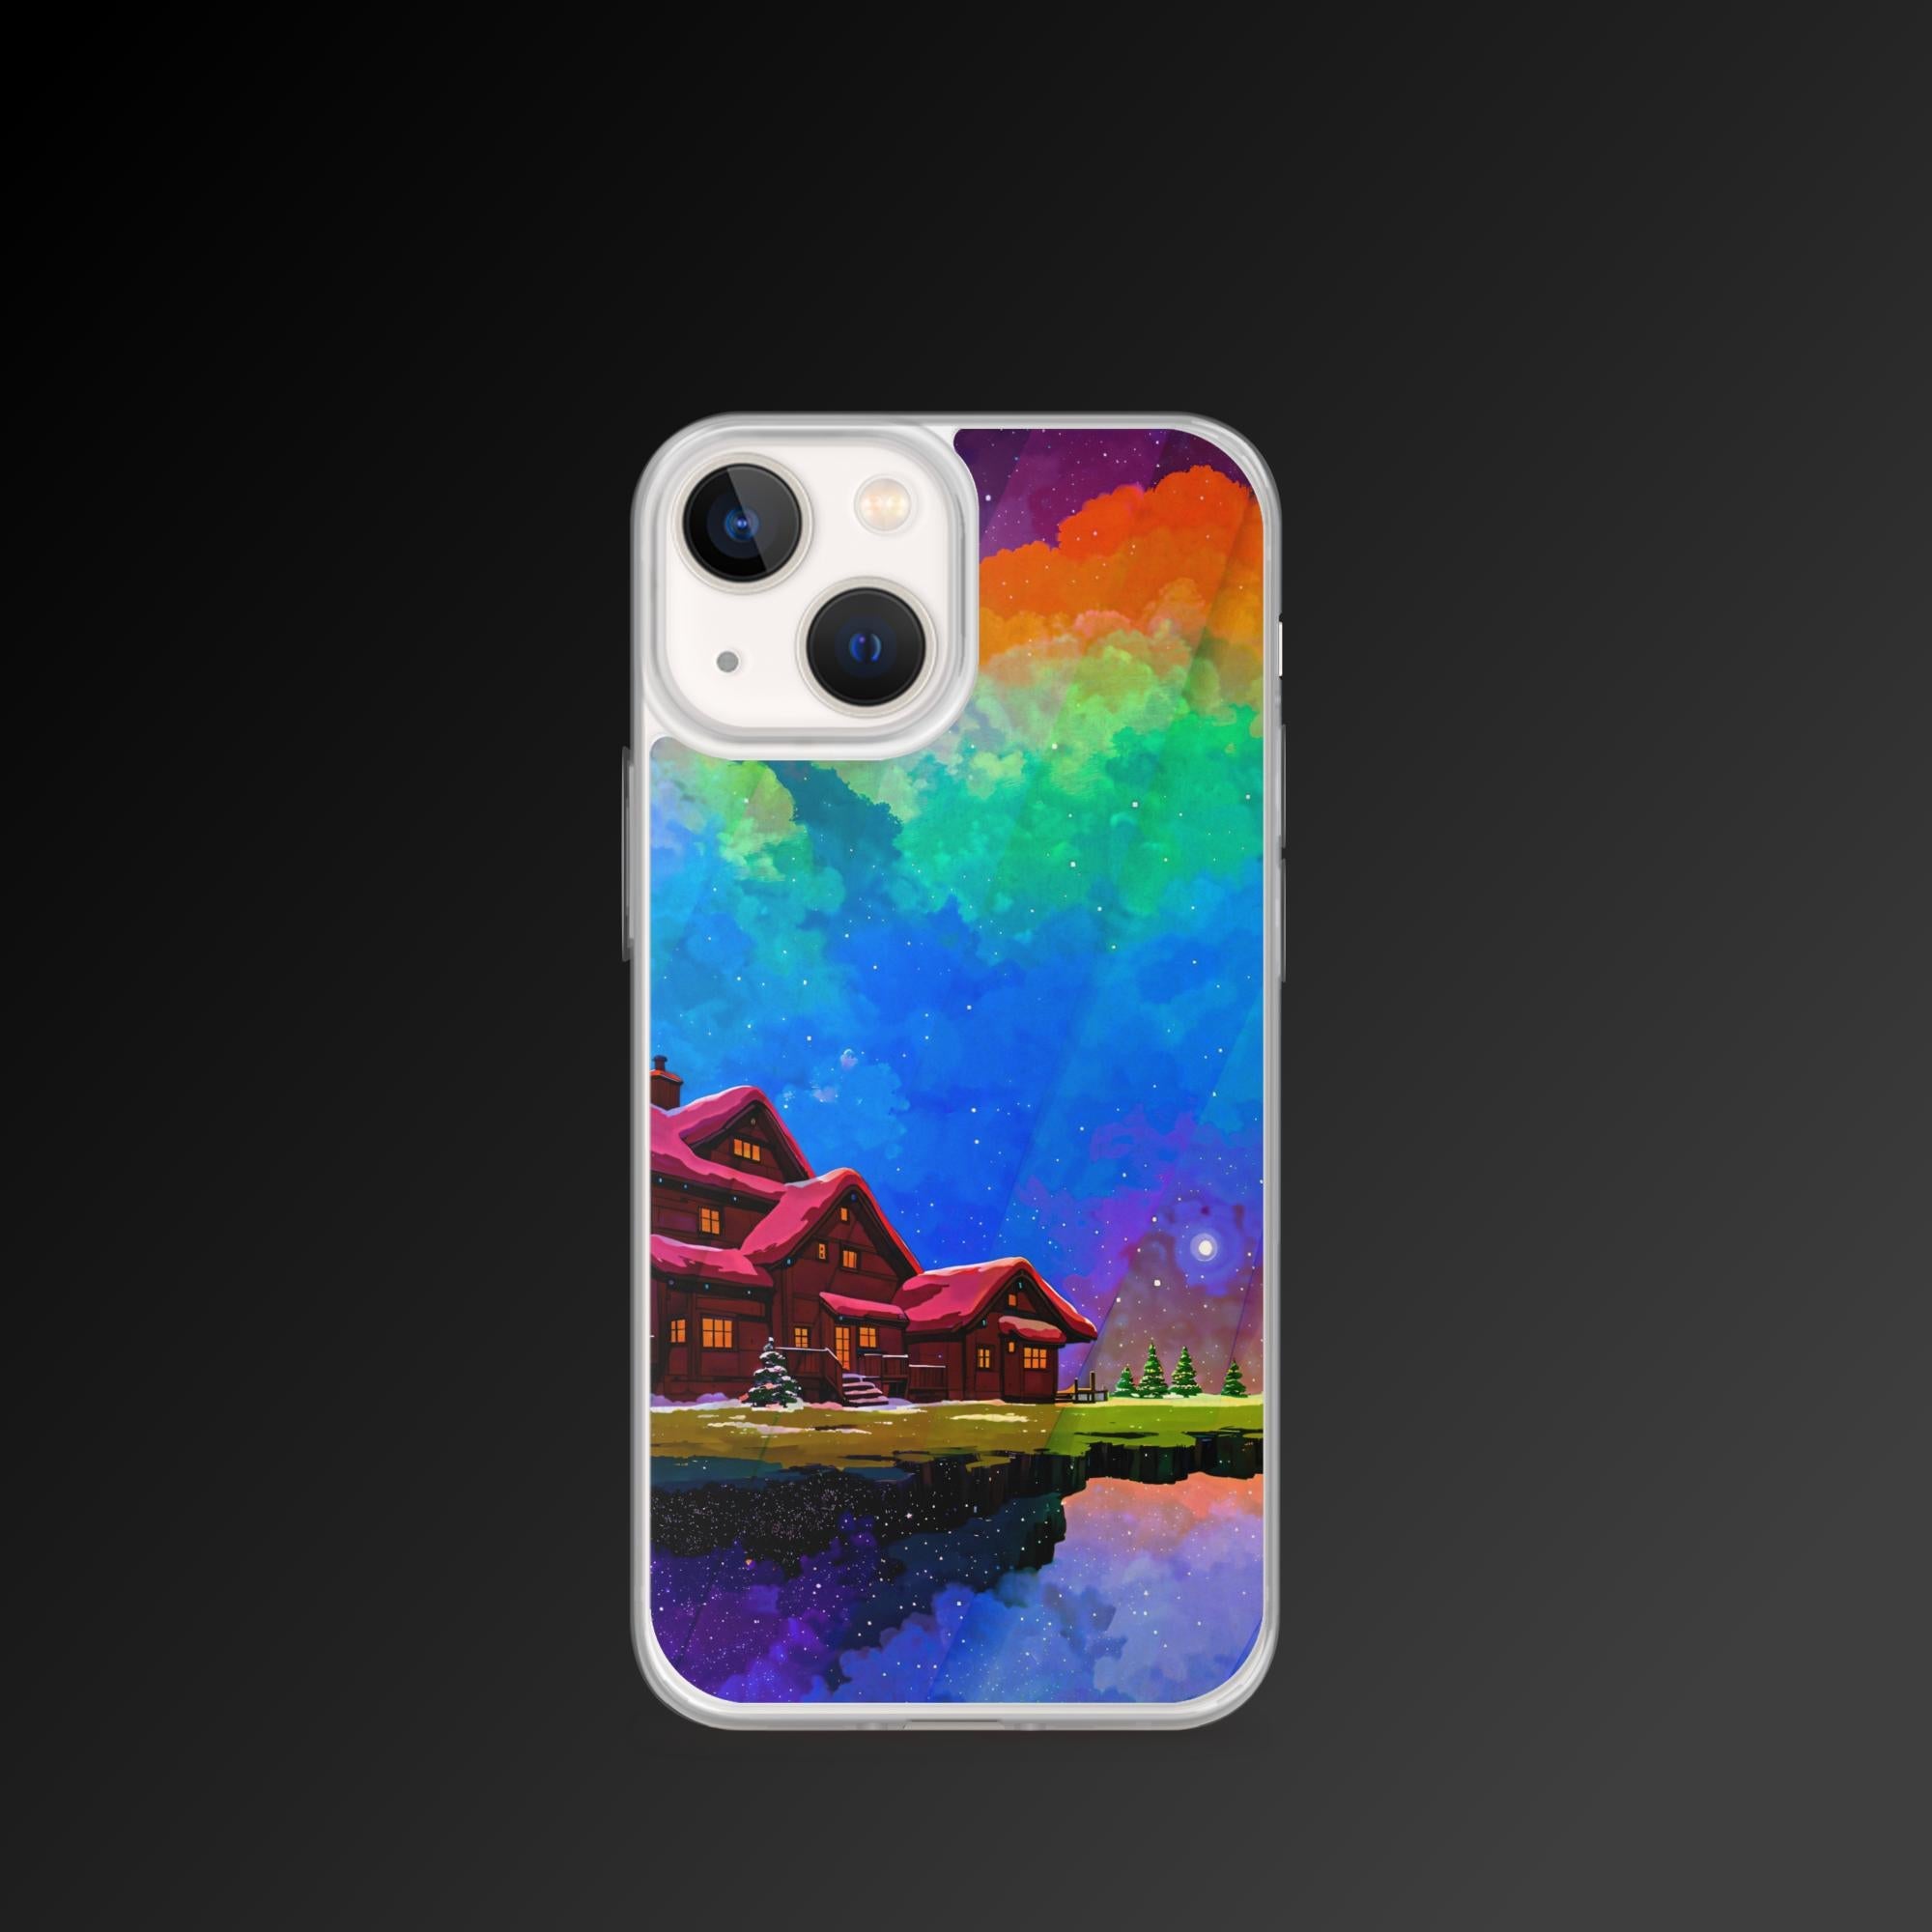 "Universal inn" clear iphone case - Clear iphone case - Ever colorful